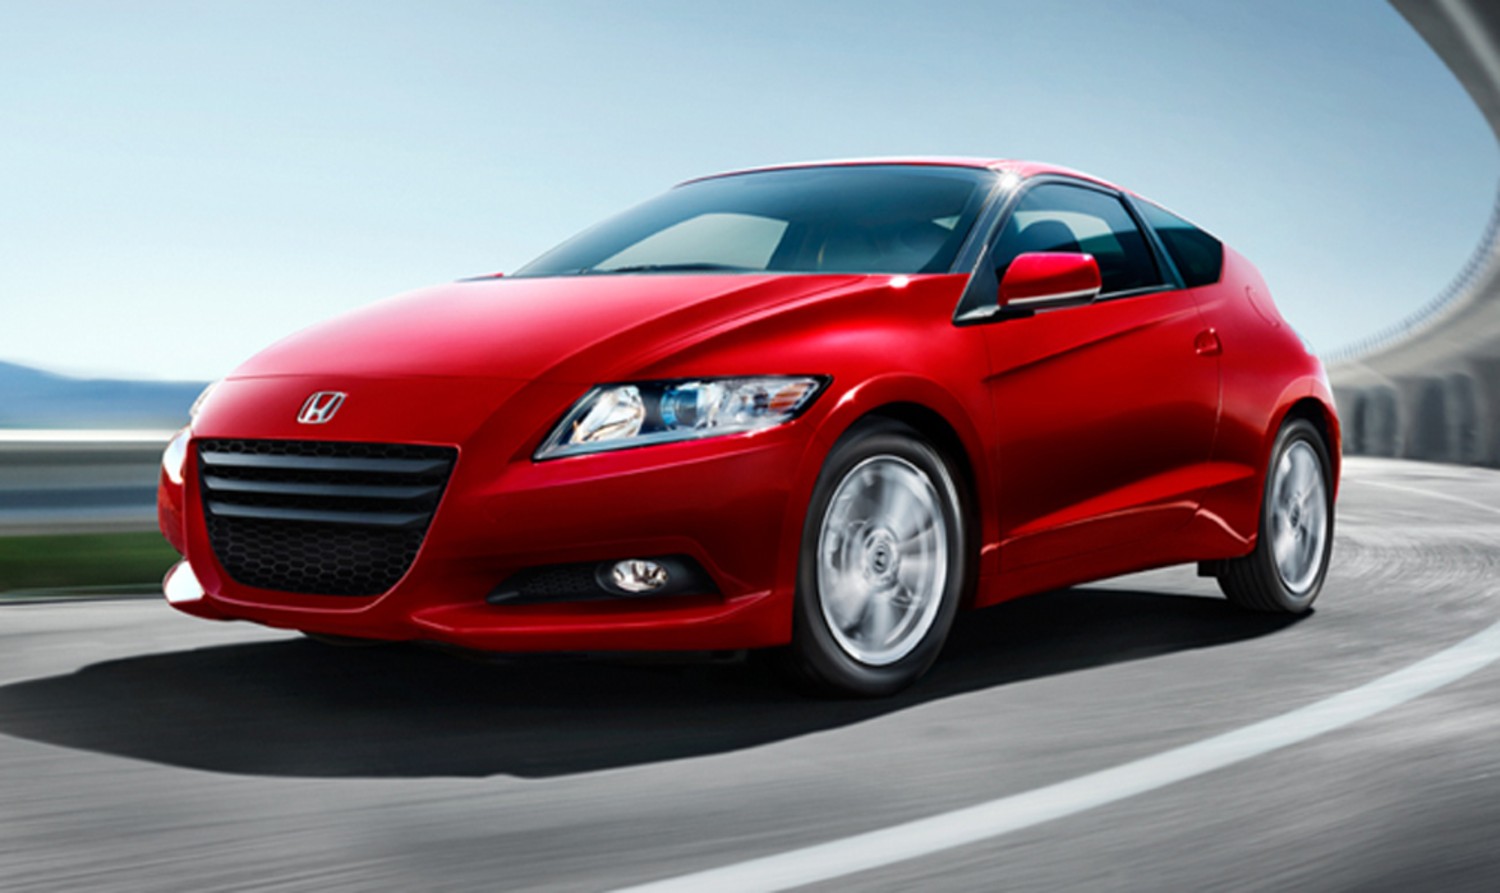 Here comes the 'responsibly indulgent' Honda CR-Z